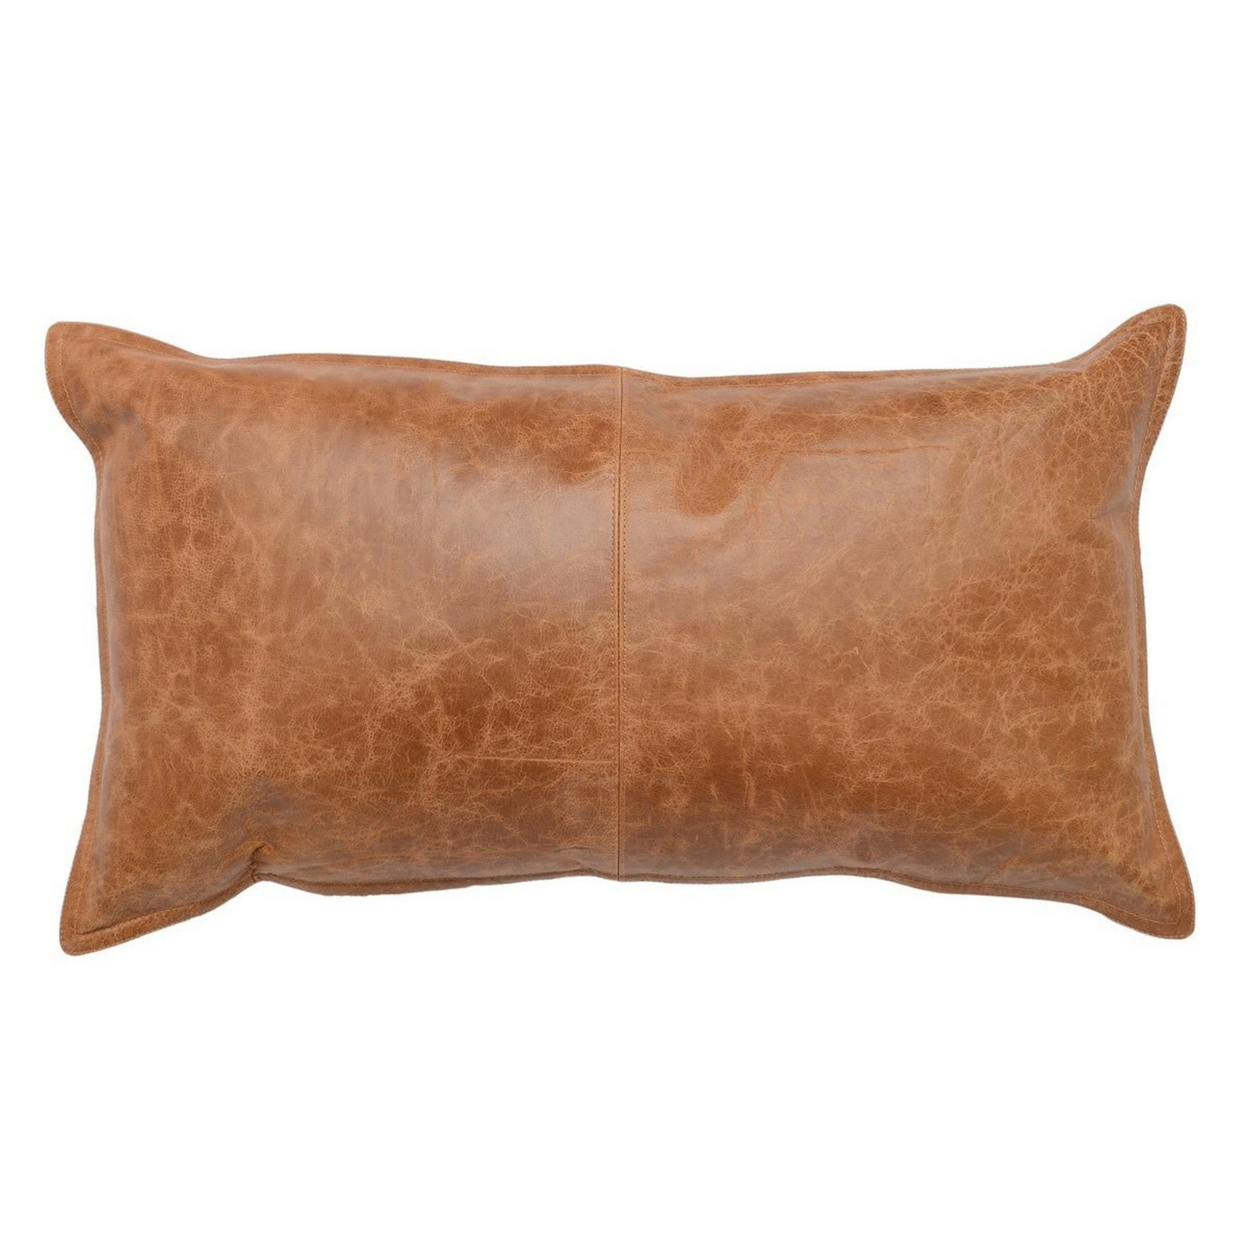 Rectangular Leatherette Throw Pillow With Stitched Details, Small, Brown- Saltoro Sherpi